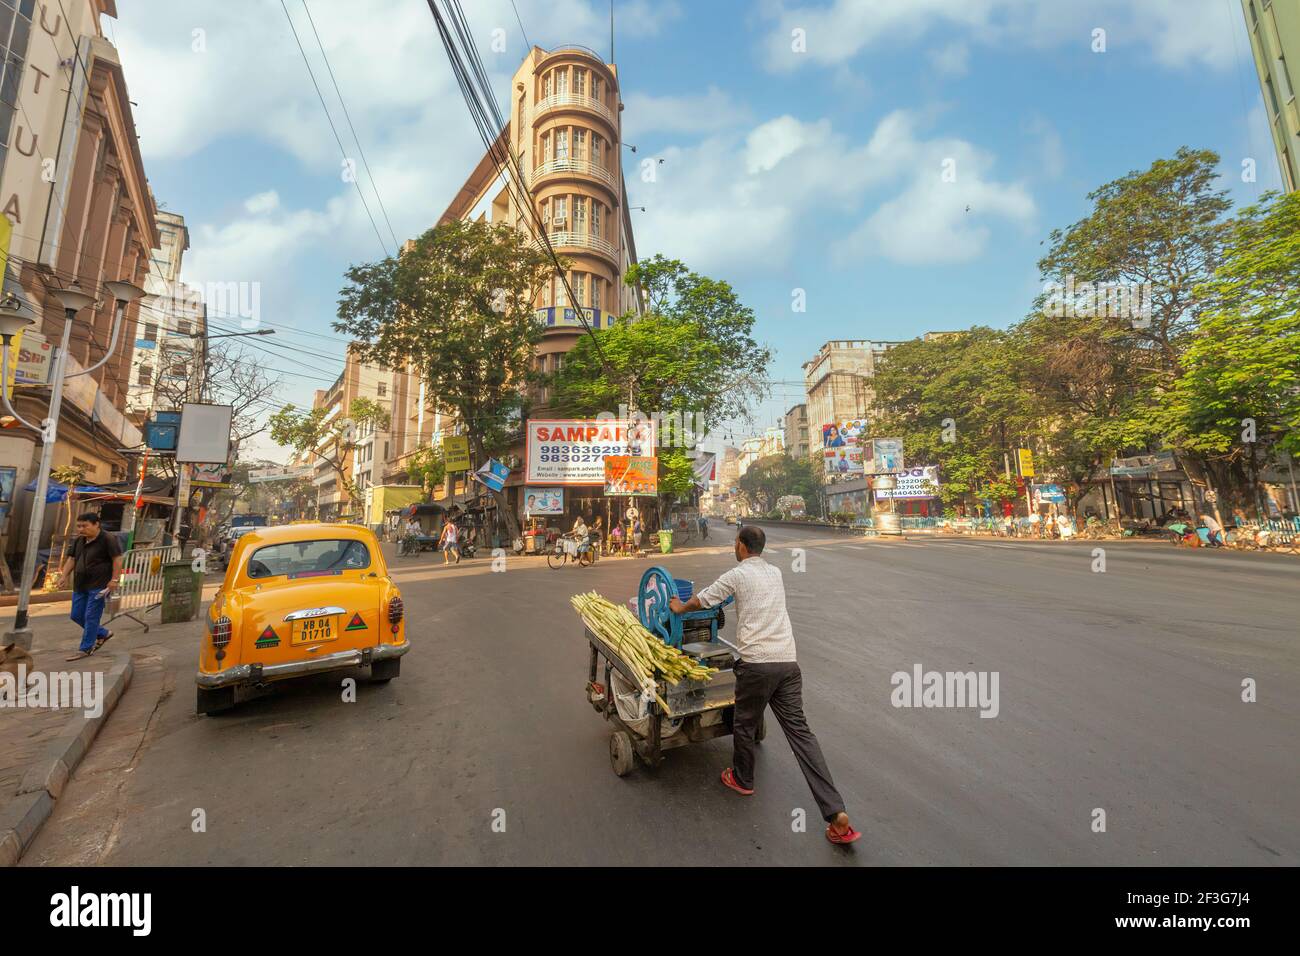 Vendor with a sugarcane juice cart on city road with view of office buildings at Chandni Chowk area of Kolkata, India Stock Photo